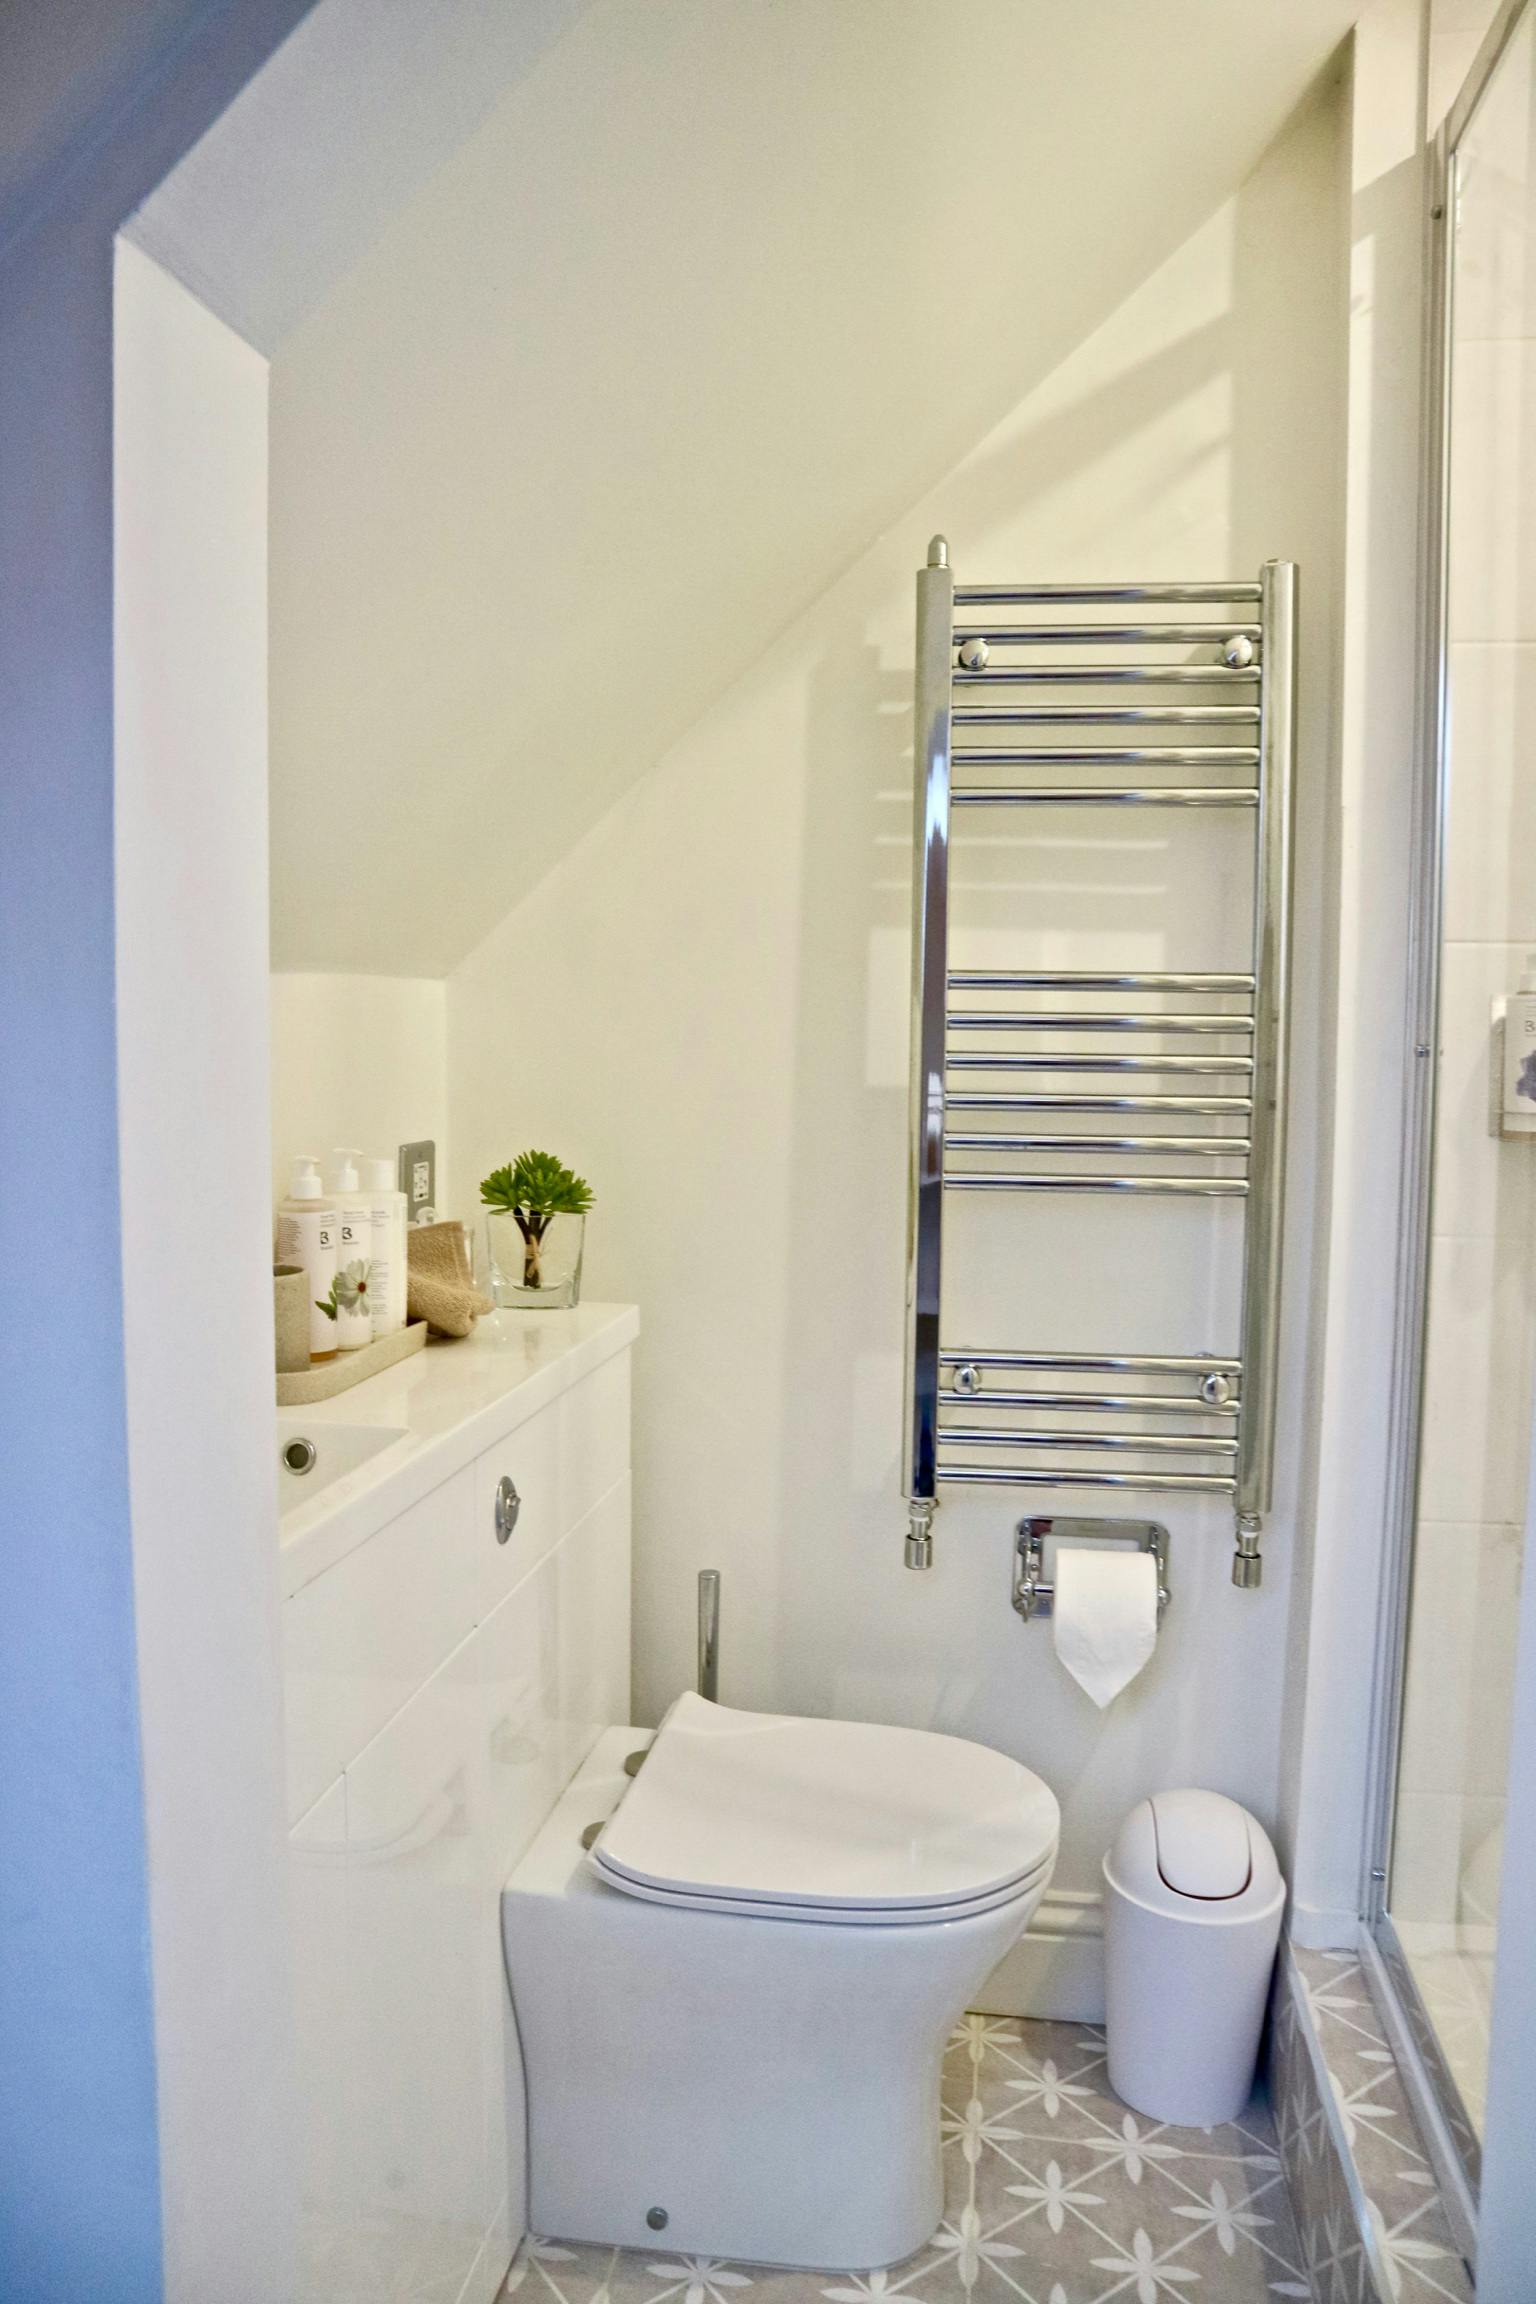 Attic ensuite, petitie but perfectly formed